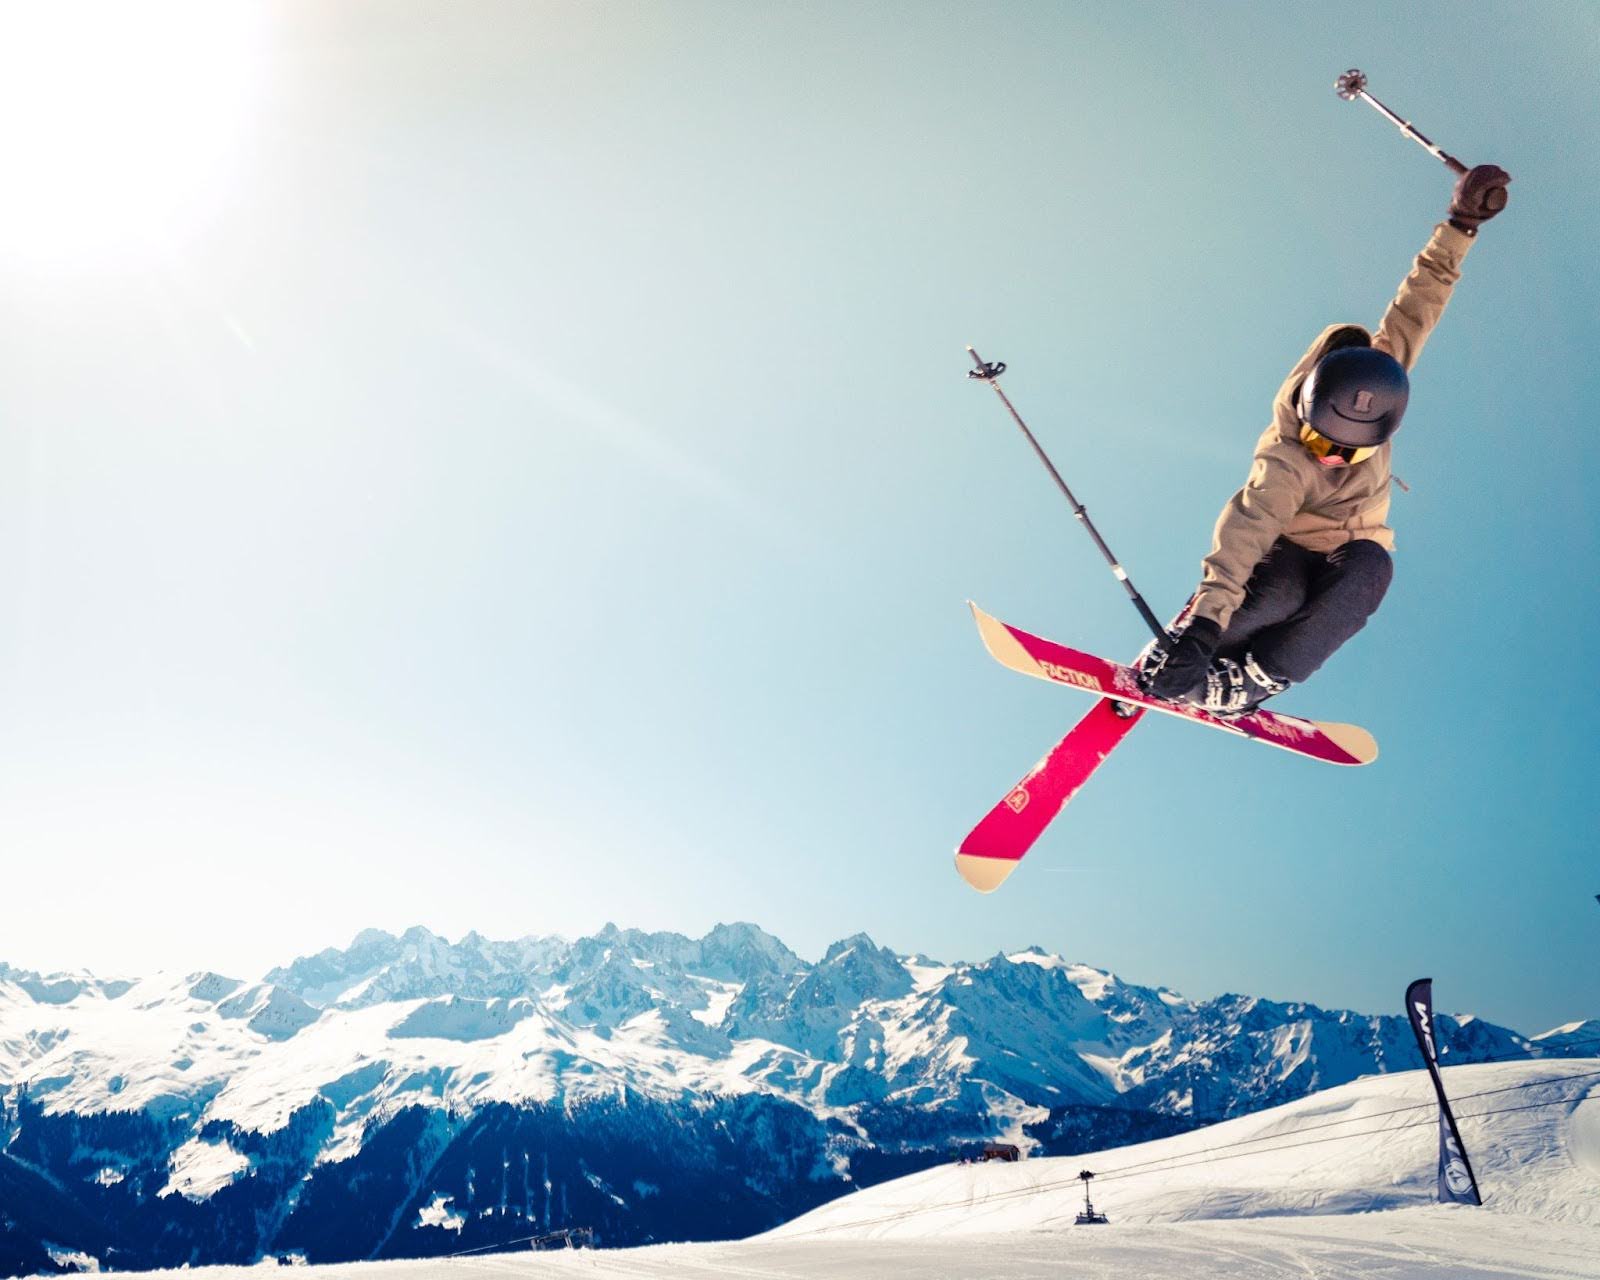 example image of a guy skiing in ski apparel similar to the images used in the perfect moment case